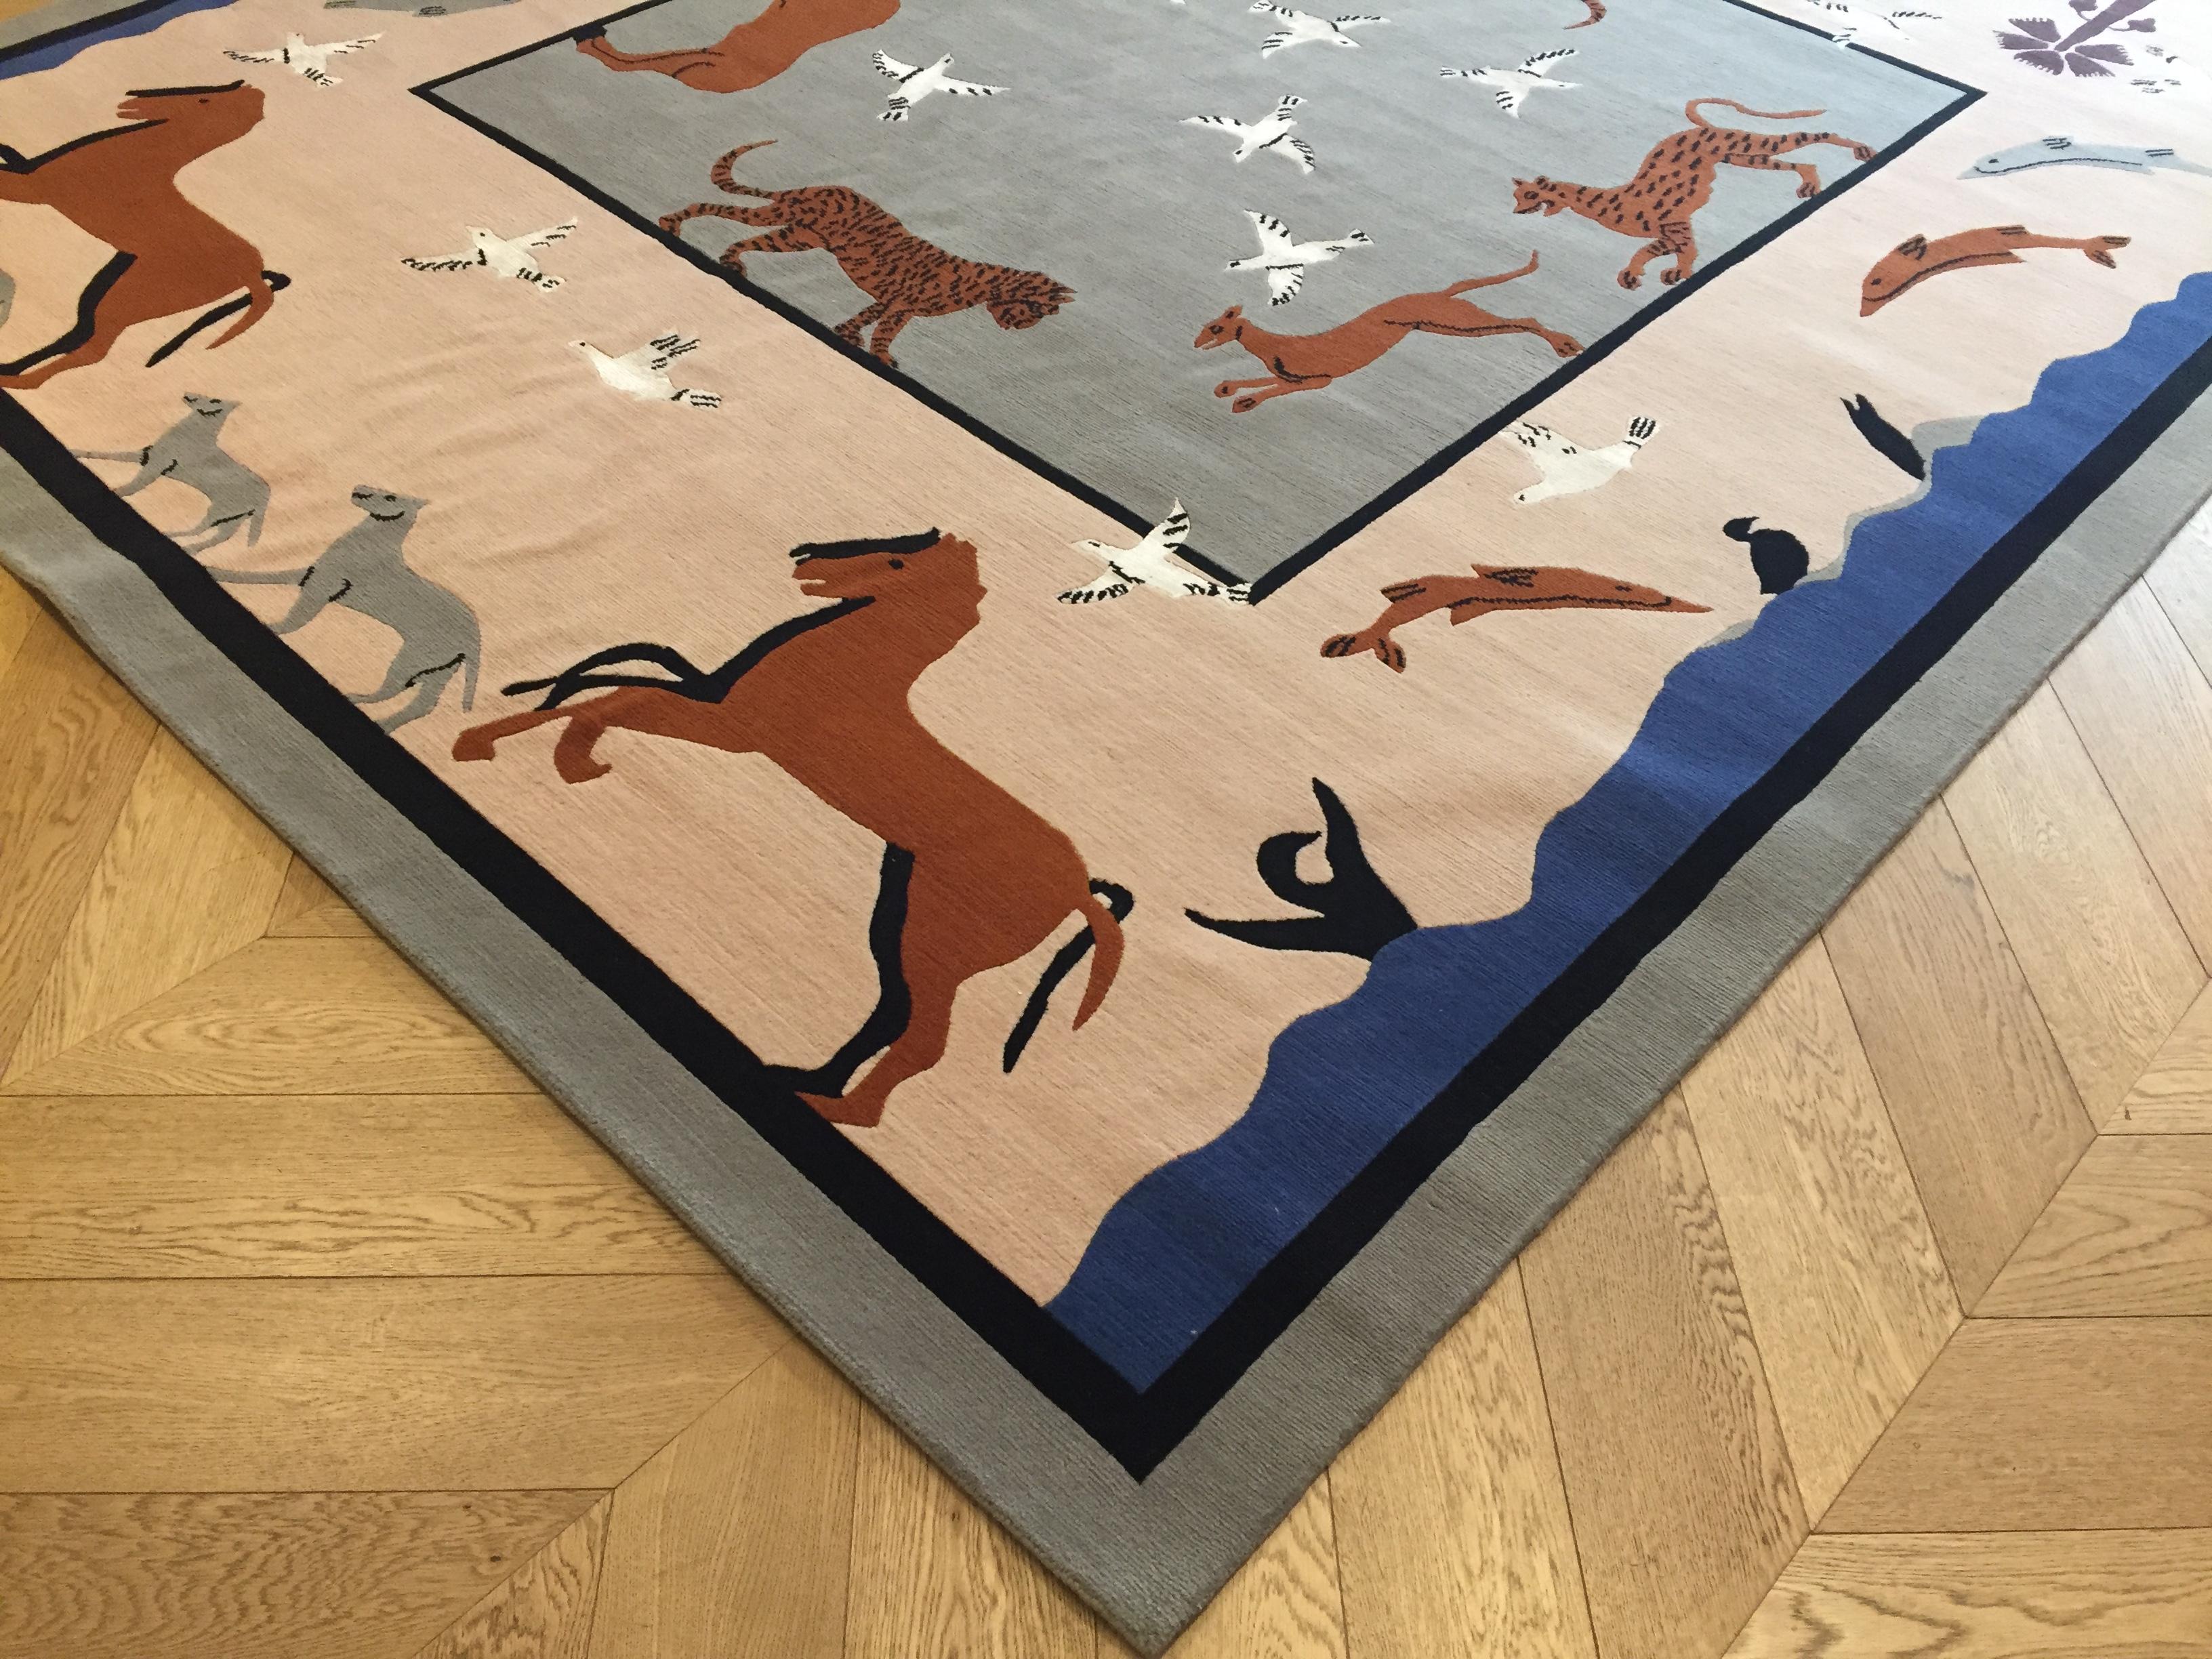 Handmade rug in Nepal based on a design by Linde Burkhardt. This rug is part of the collection 